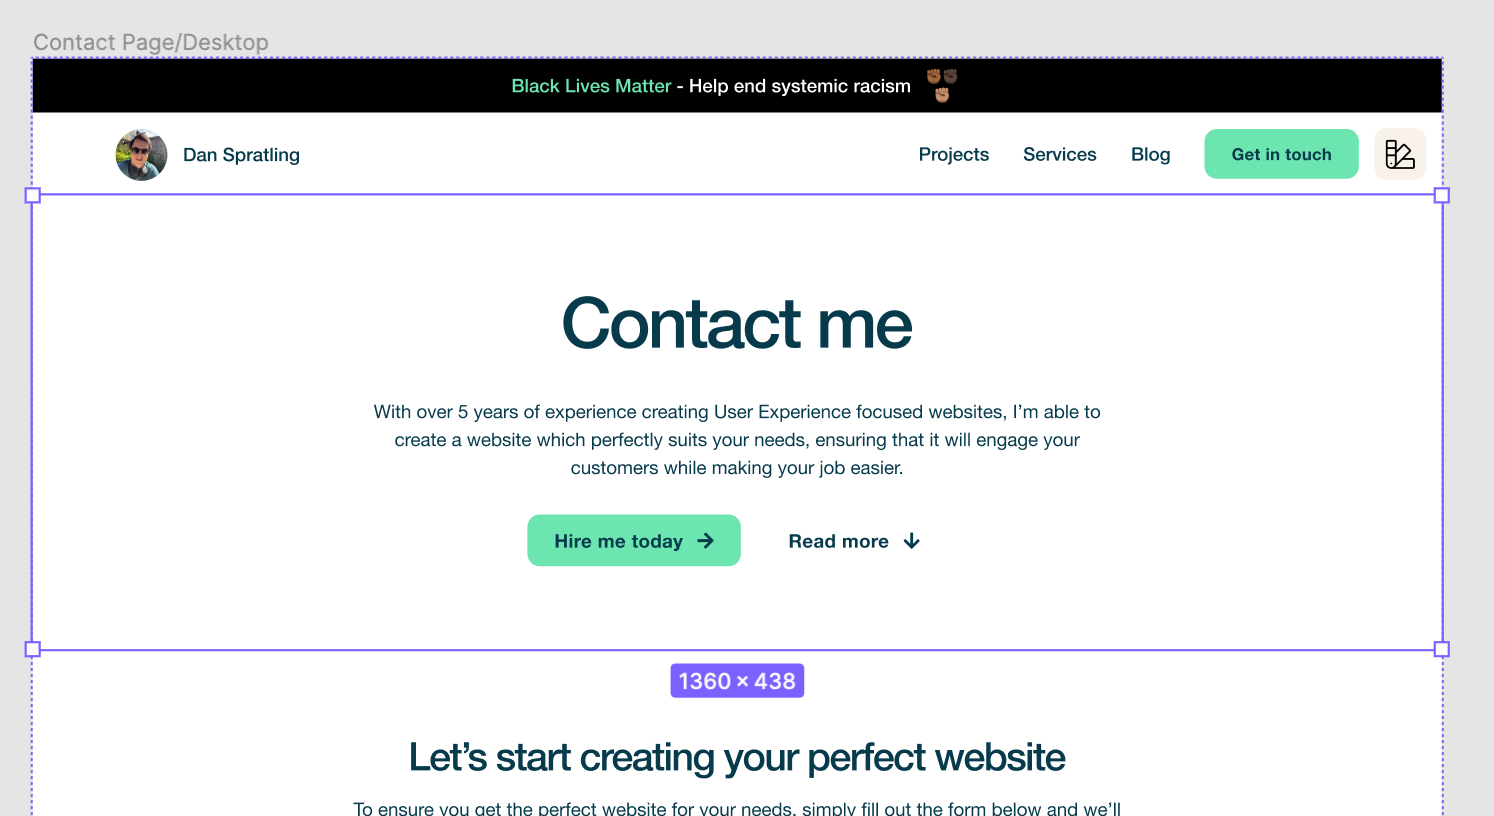 Hero design component reused on the Contact page